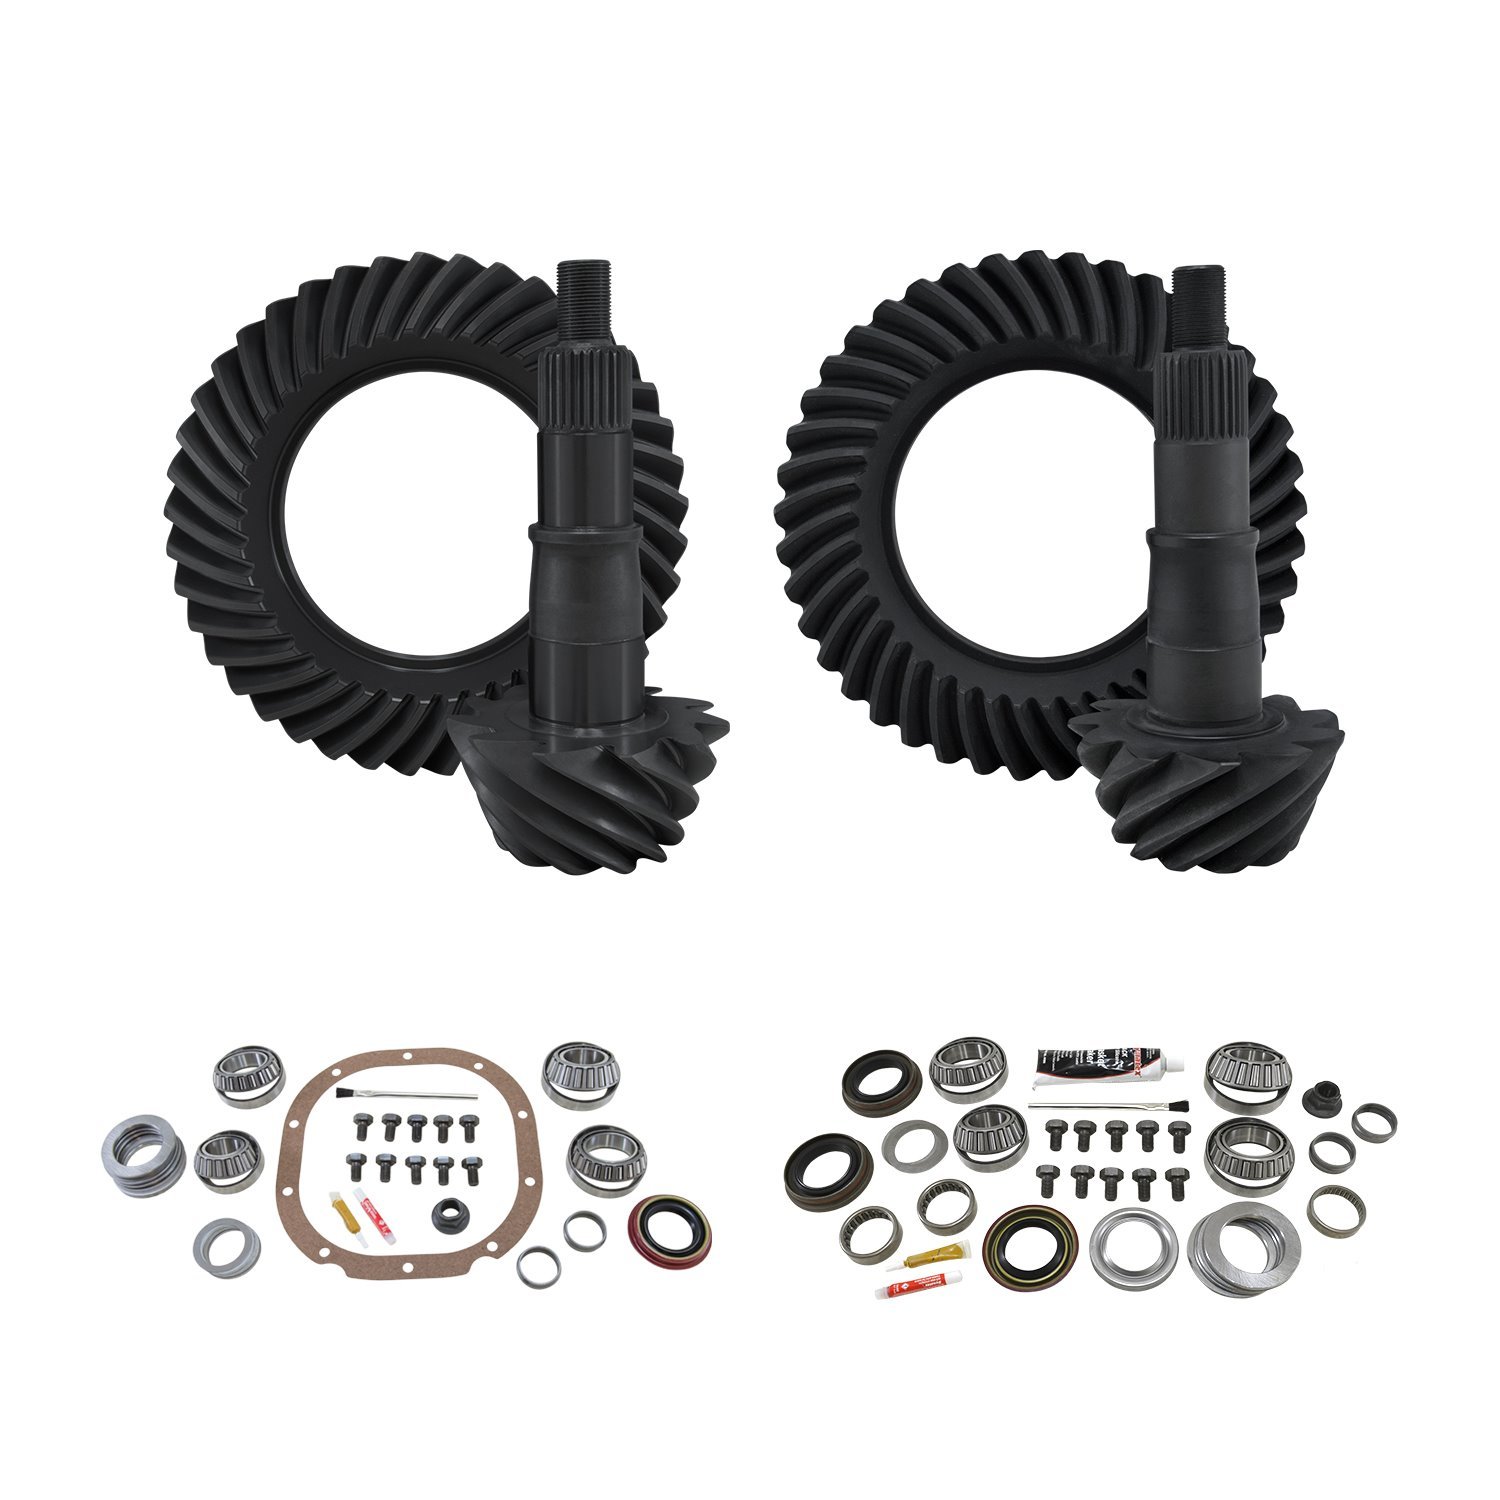 Re-Gear & Installation Kit, Ford 8.8 in., 2000-2008 F150, 5.13 Ratio, Fr&Rr